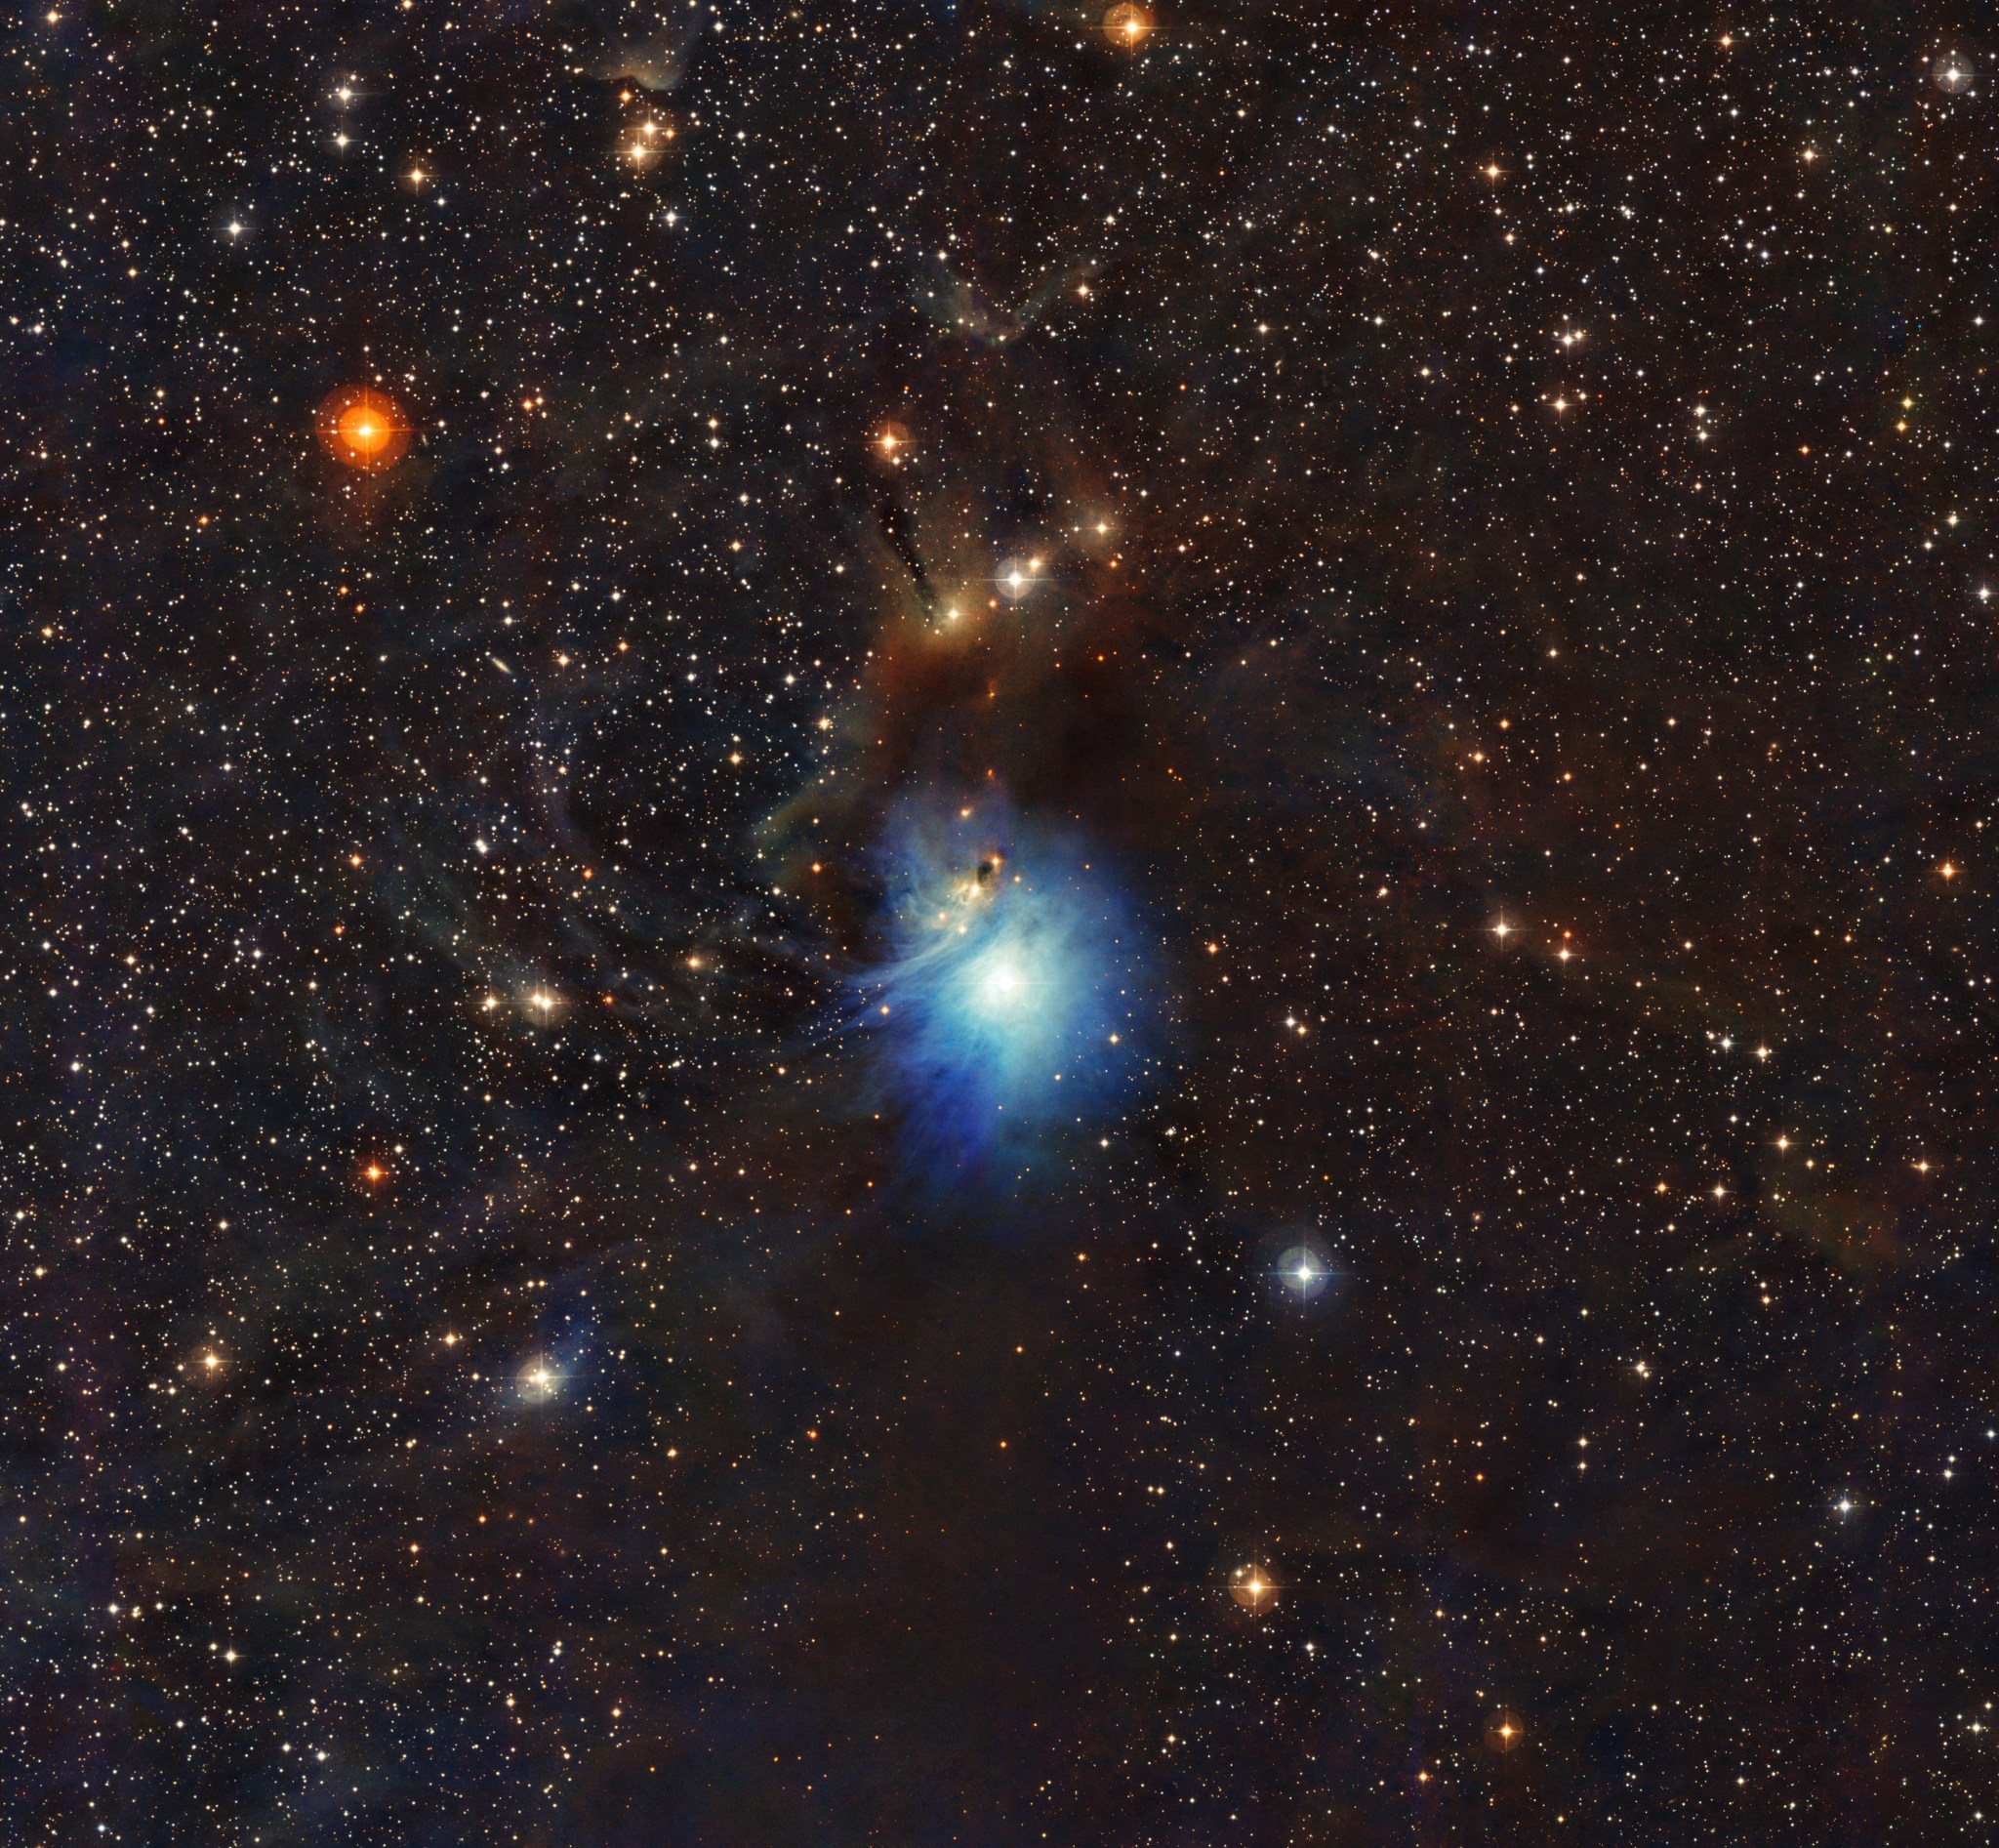 Blue light from a newborn star lights up the reflection nebula IC 2631. This nebula is part of the Chamaeleon star-forming region, which Webb will study to learn more about the formation of water and other cosmic ices.